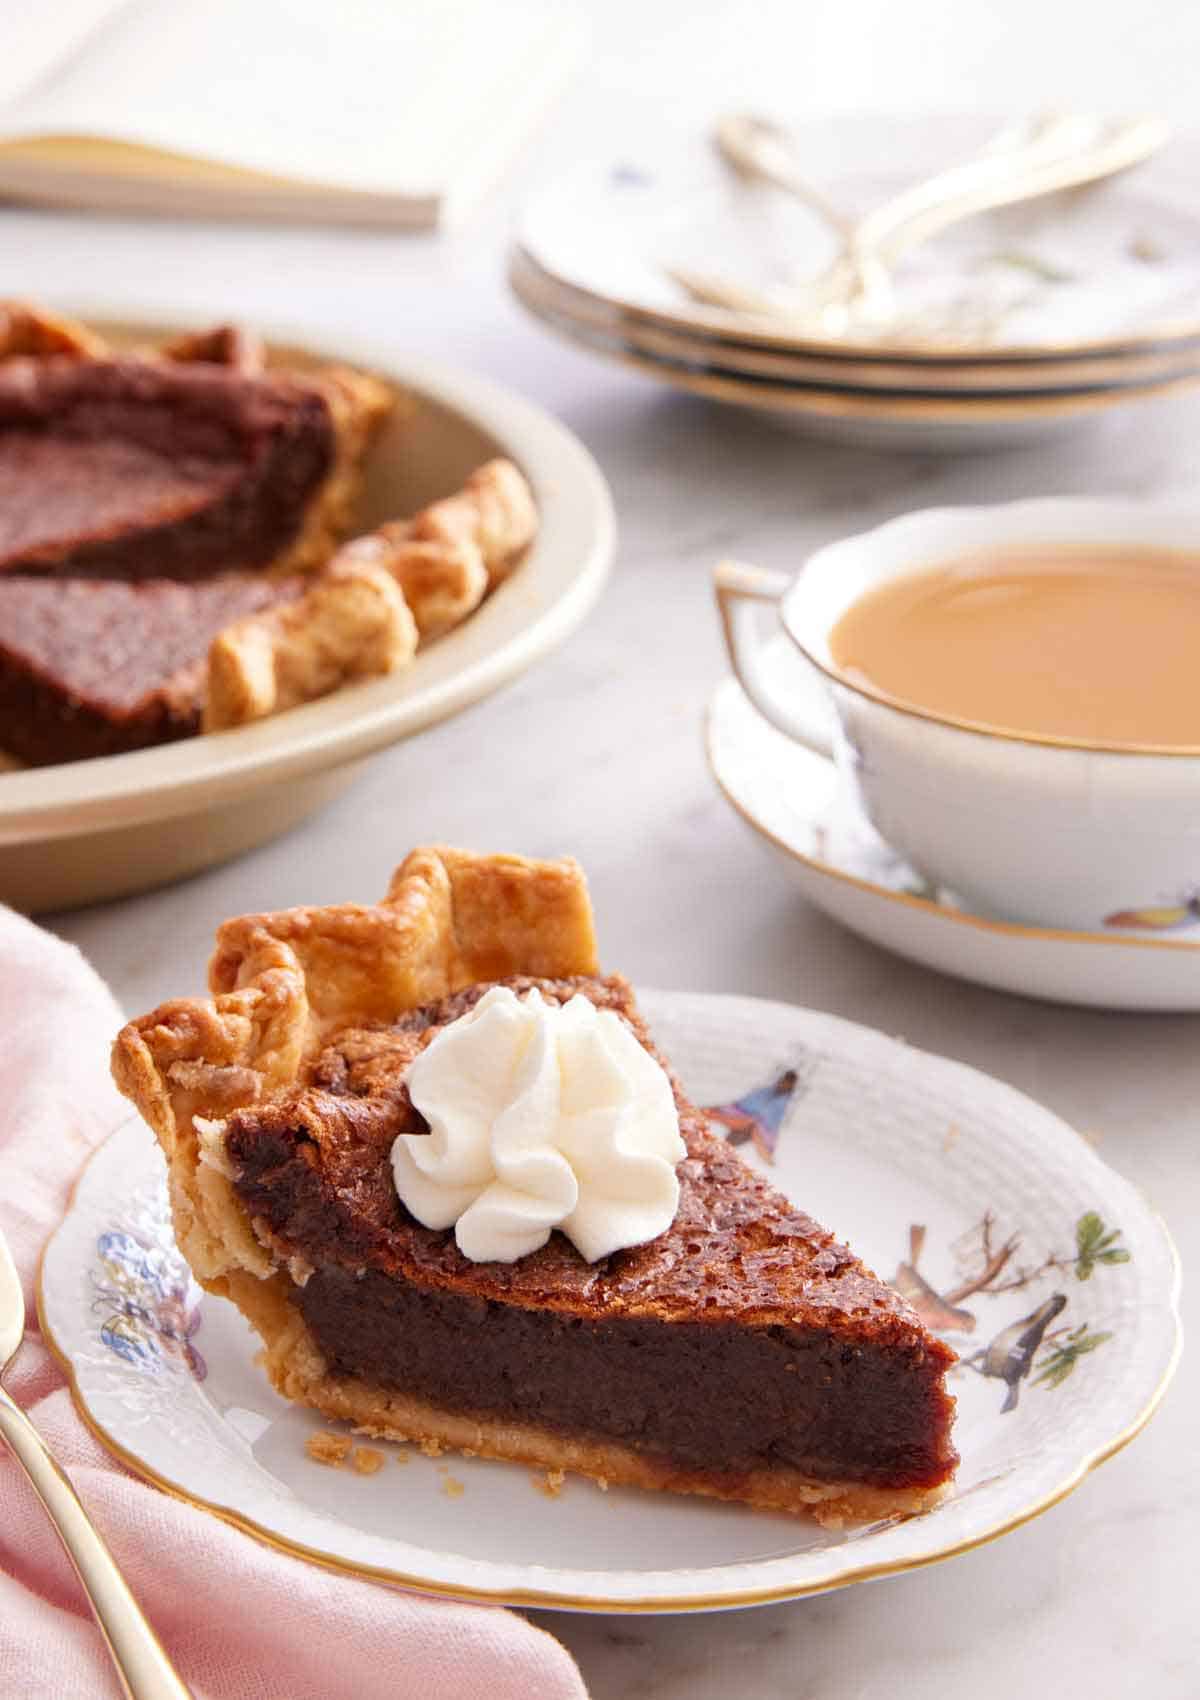 A slice of chocolate chess pie on a plate with a dollop of whipped cream on top. Coffee and more pie in the background.